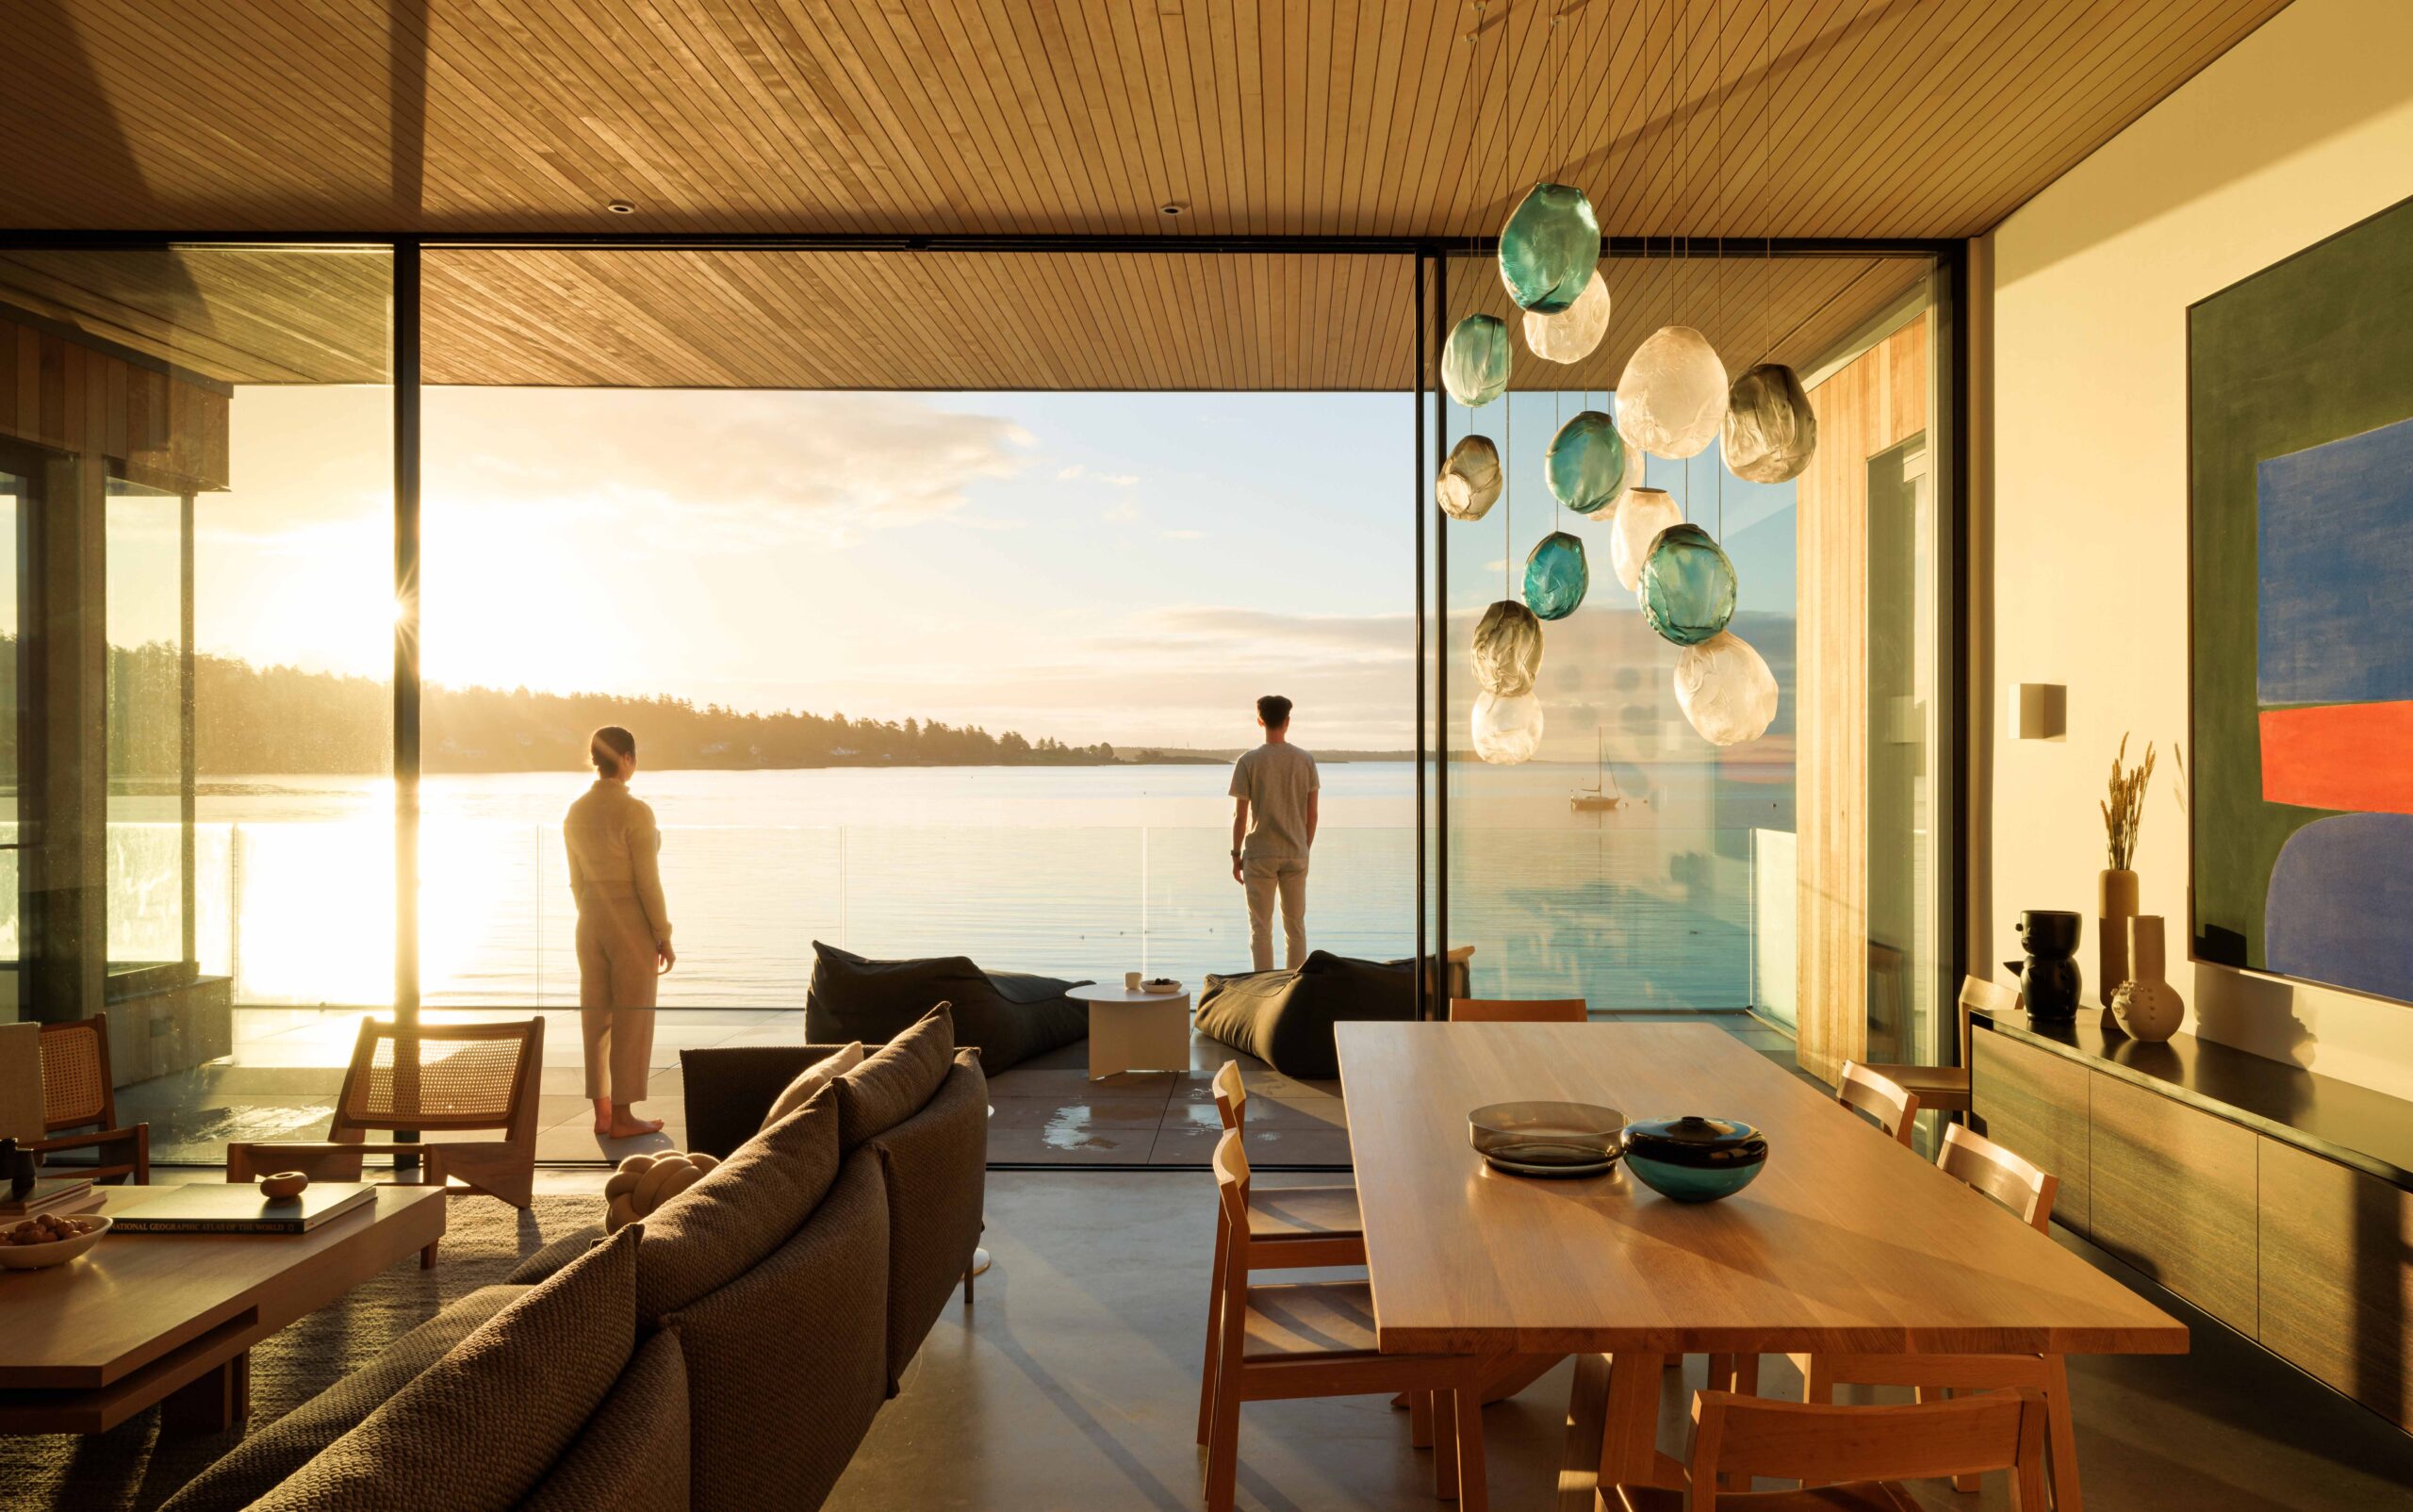 A man and woman watch the sunrise over a water from a deck with large open sliding doors. In the foreground a light oak dining table and chairs on the right has a blue white and grey hand blown glass light fixture above and on the left a modern sofa with textured grey fabric is grouped with a wood and cane-backed arm chair. The the Falken Reynolds designed interior and view are peaceful and calming. A modernist painting is hung on the right wall.